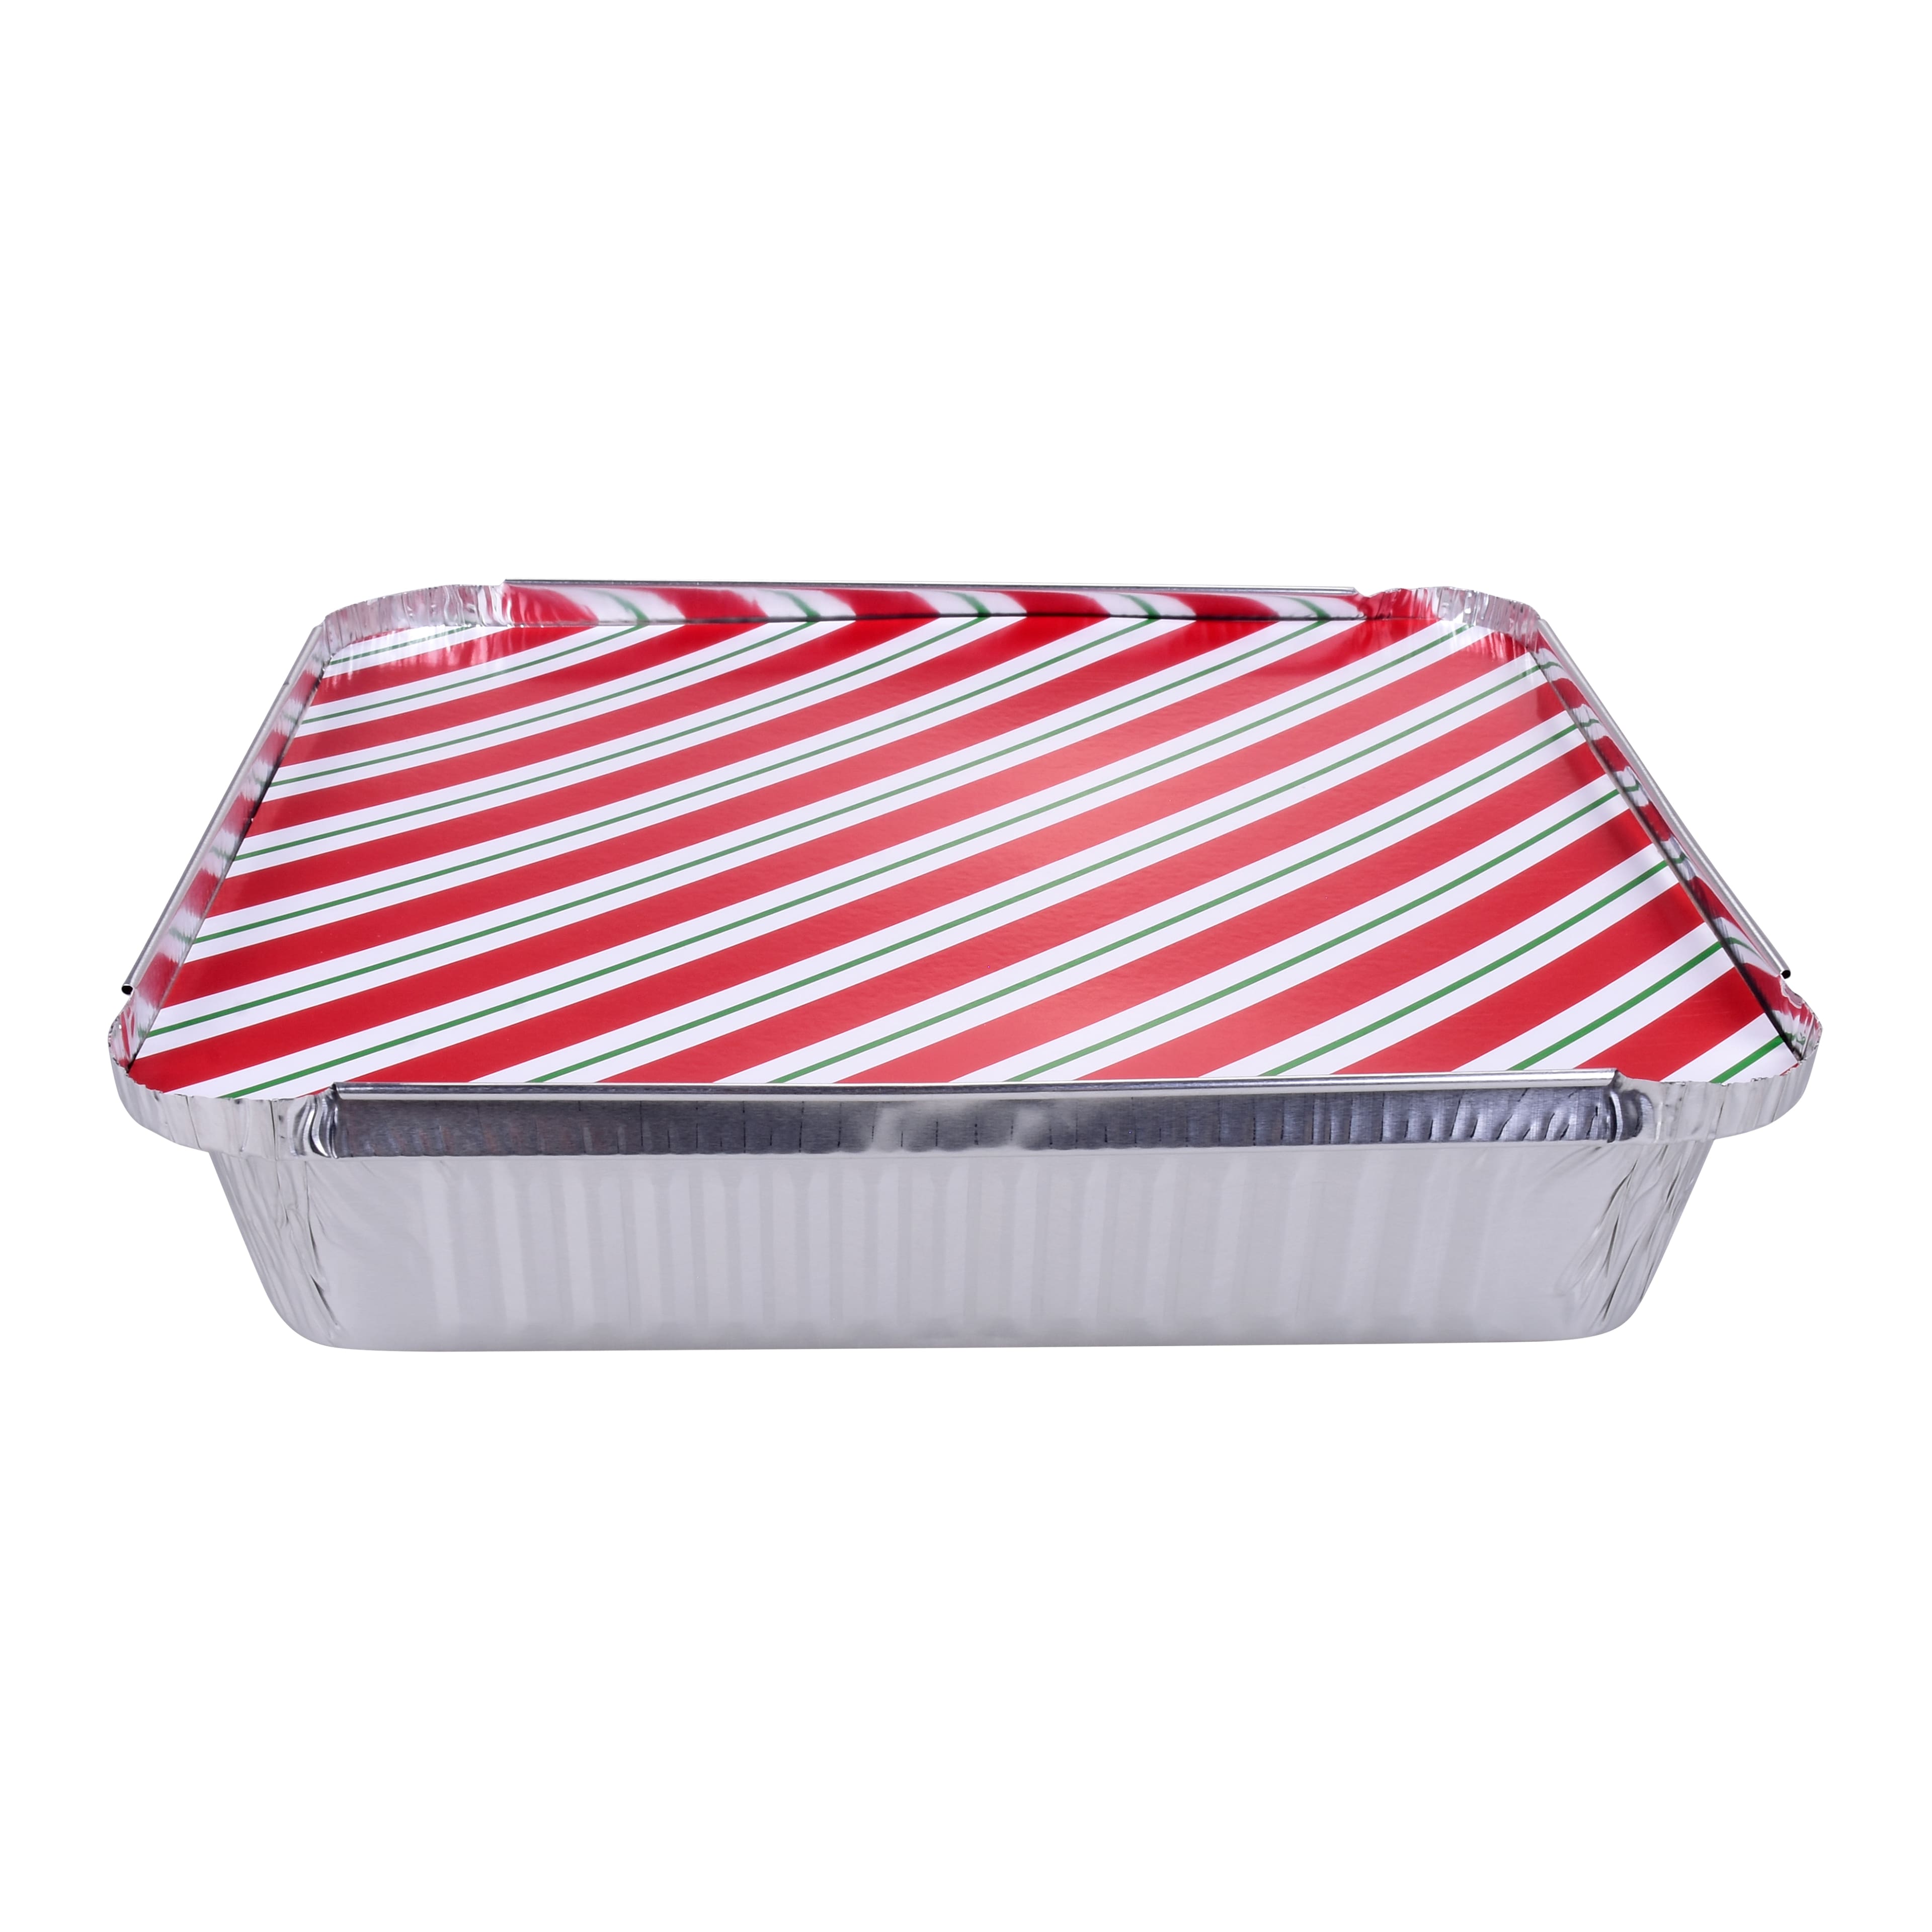 6 Christmas Holiday Gingerbread Candy Disposable Aluminum Baking Pans by  Celebrate It™, 6ct.